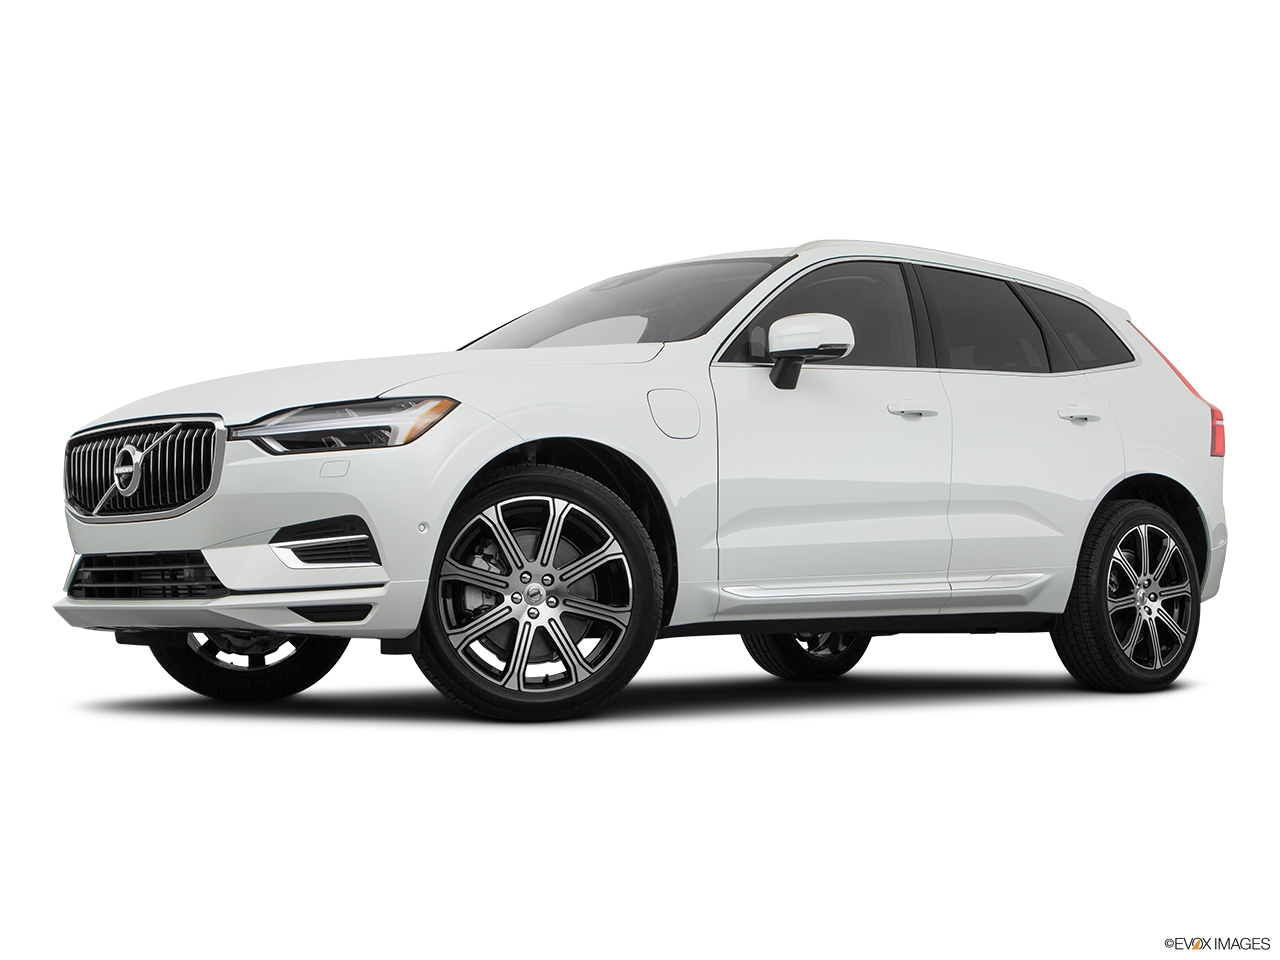 2019 Volvo XC60 T8 Inscription eAWD Plug-in Hybrid Low/wide front 5/8. 